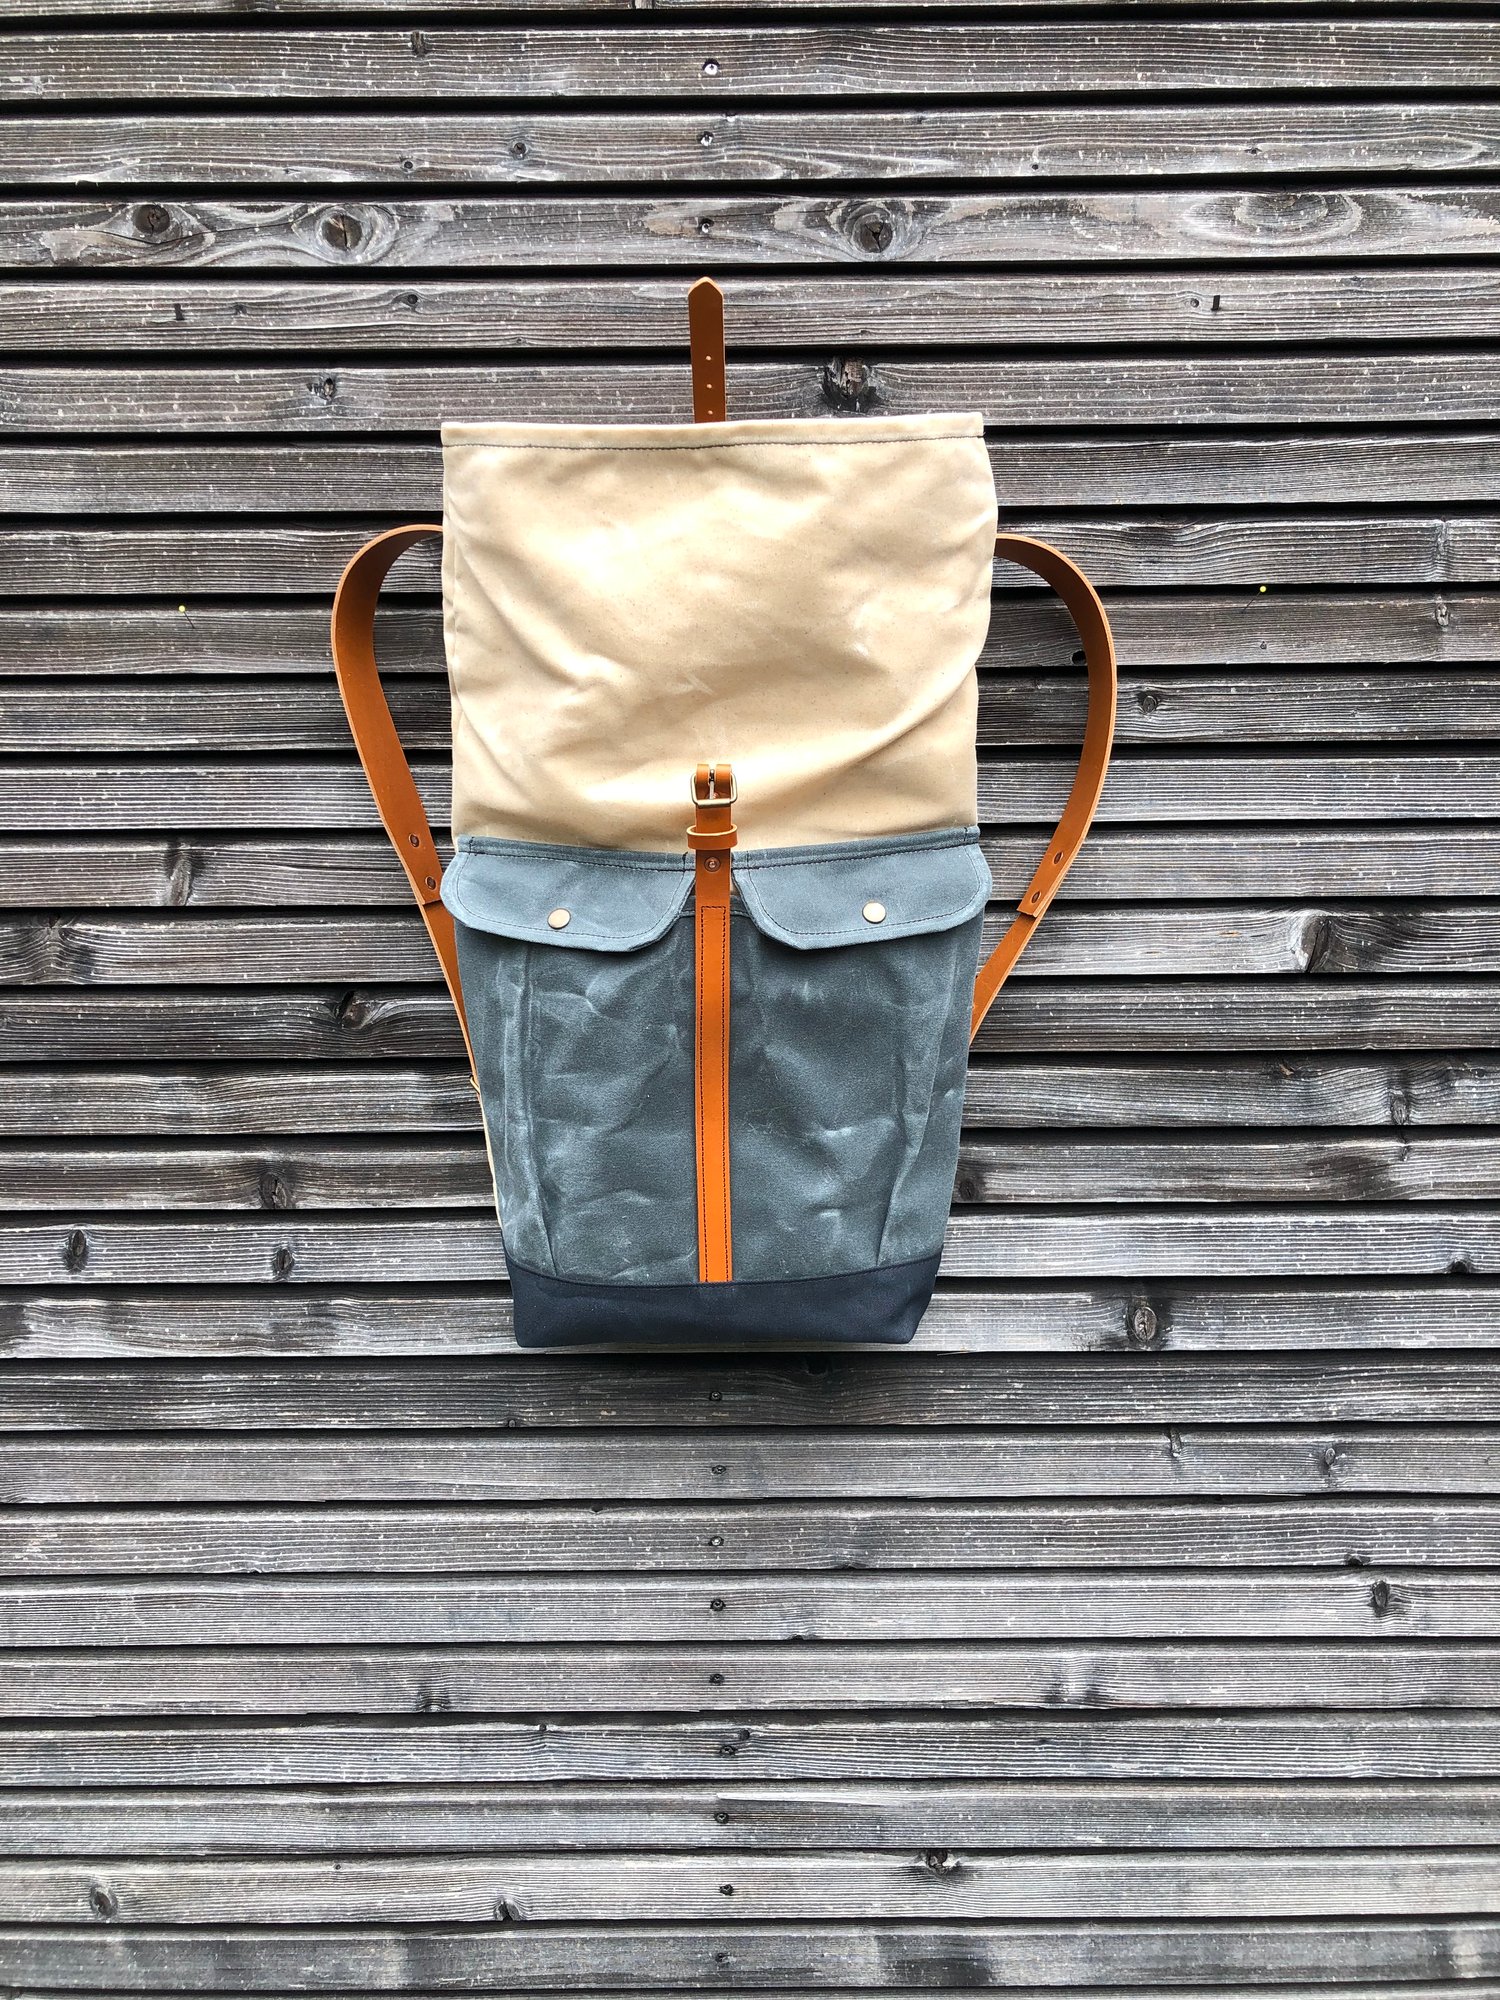 Image of Waxed canvas rucksack with roll to close top and vegetable tanned leather shoulder straps